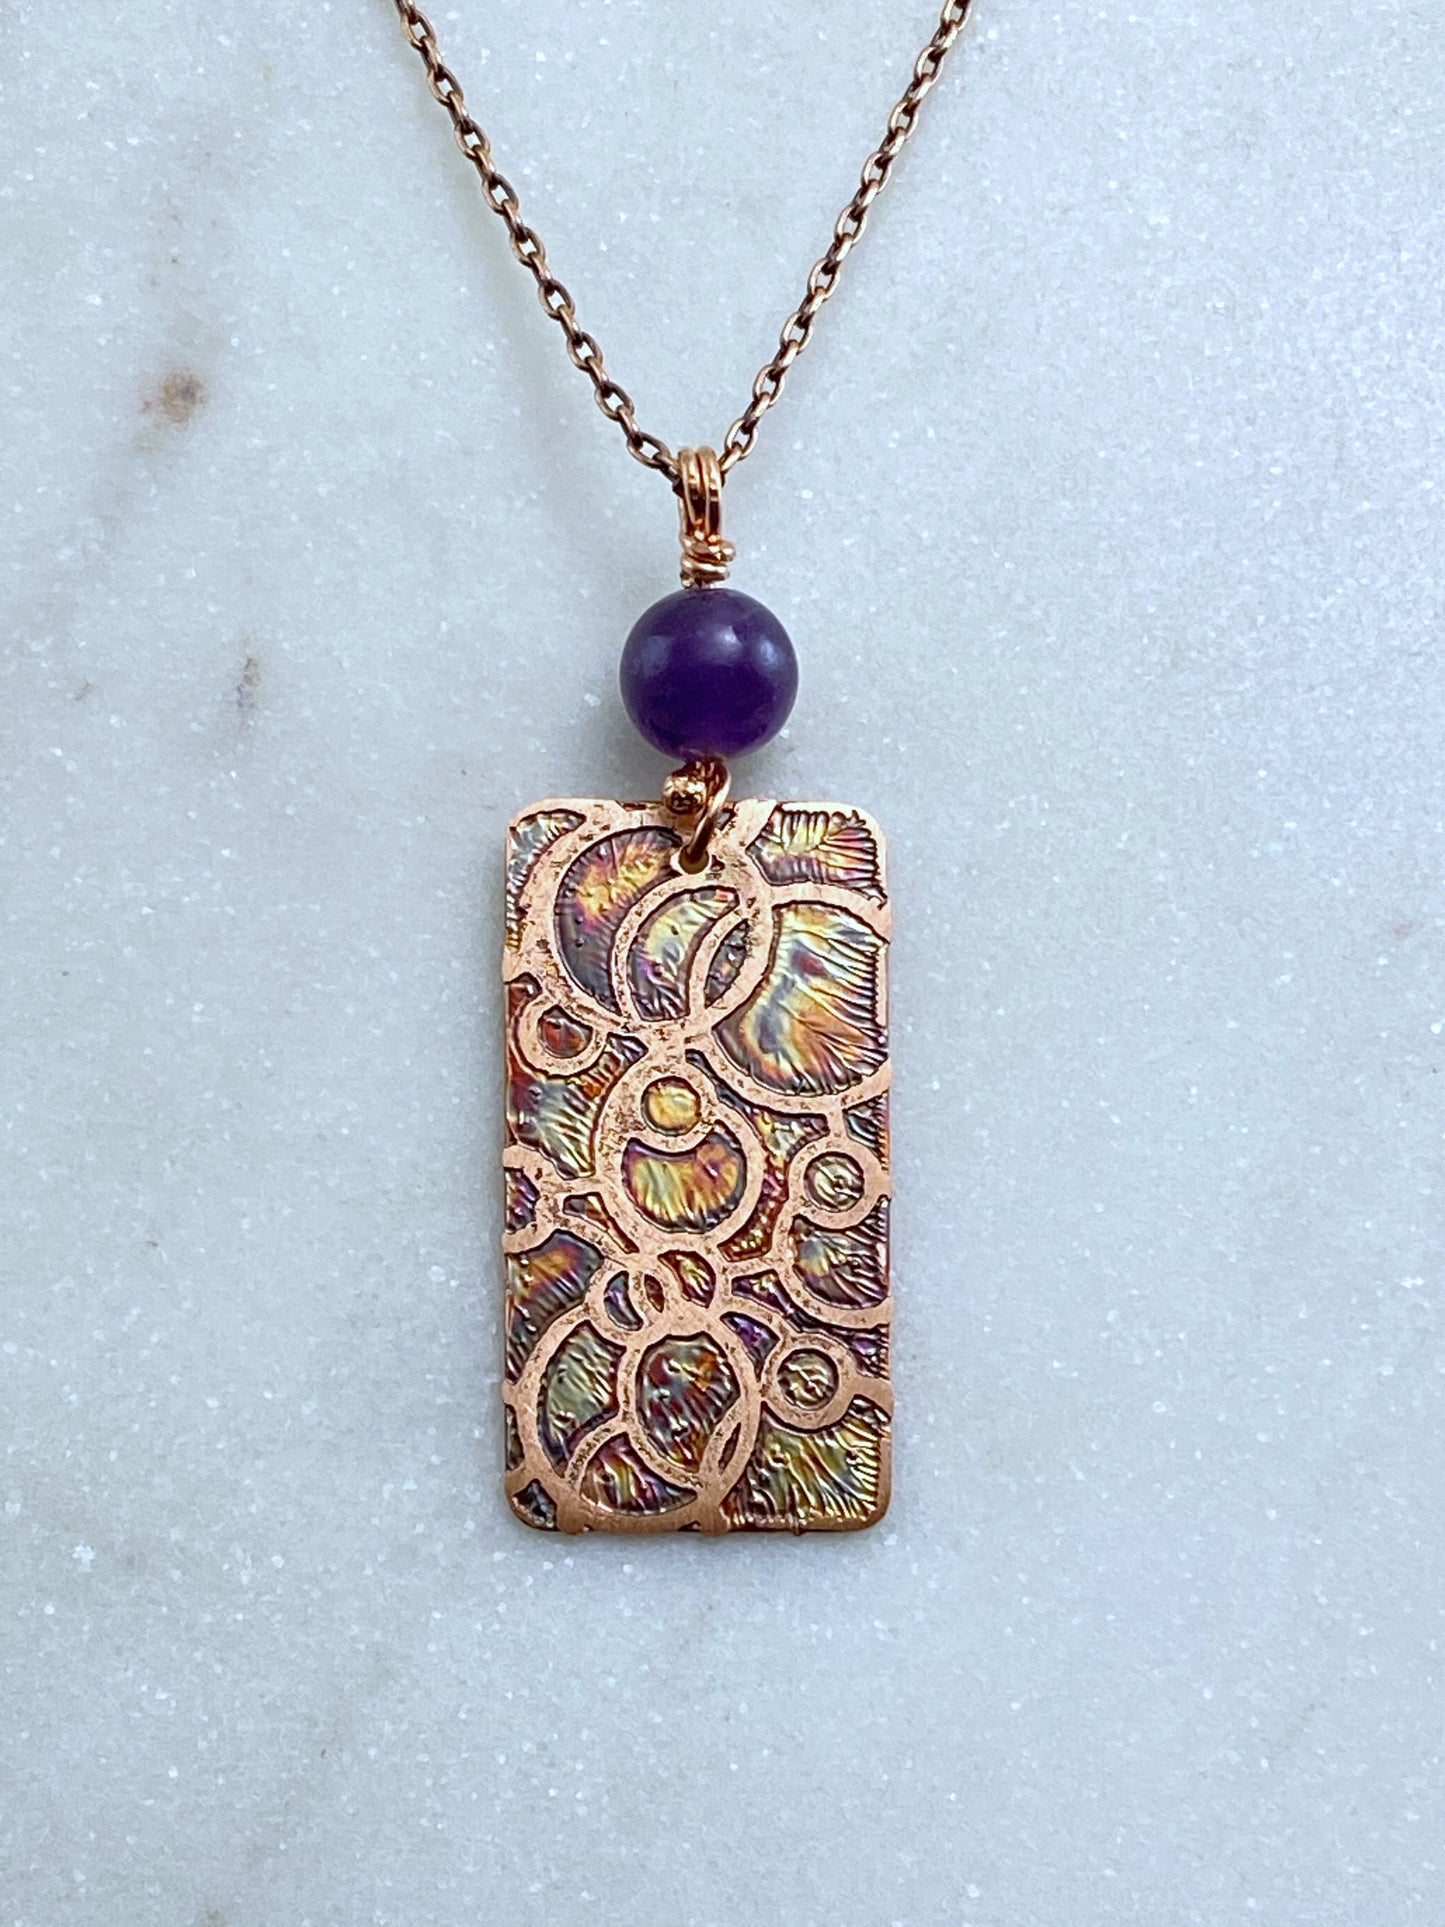 Acid etched copper open dot necklace with amethyst